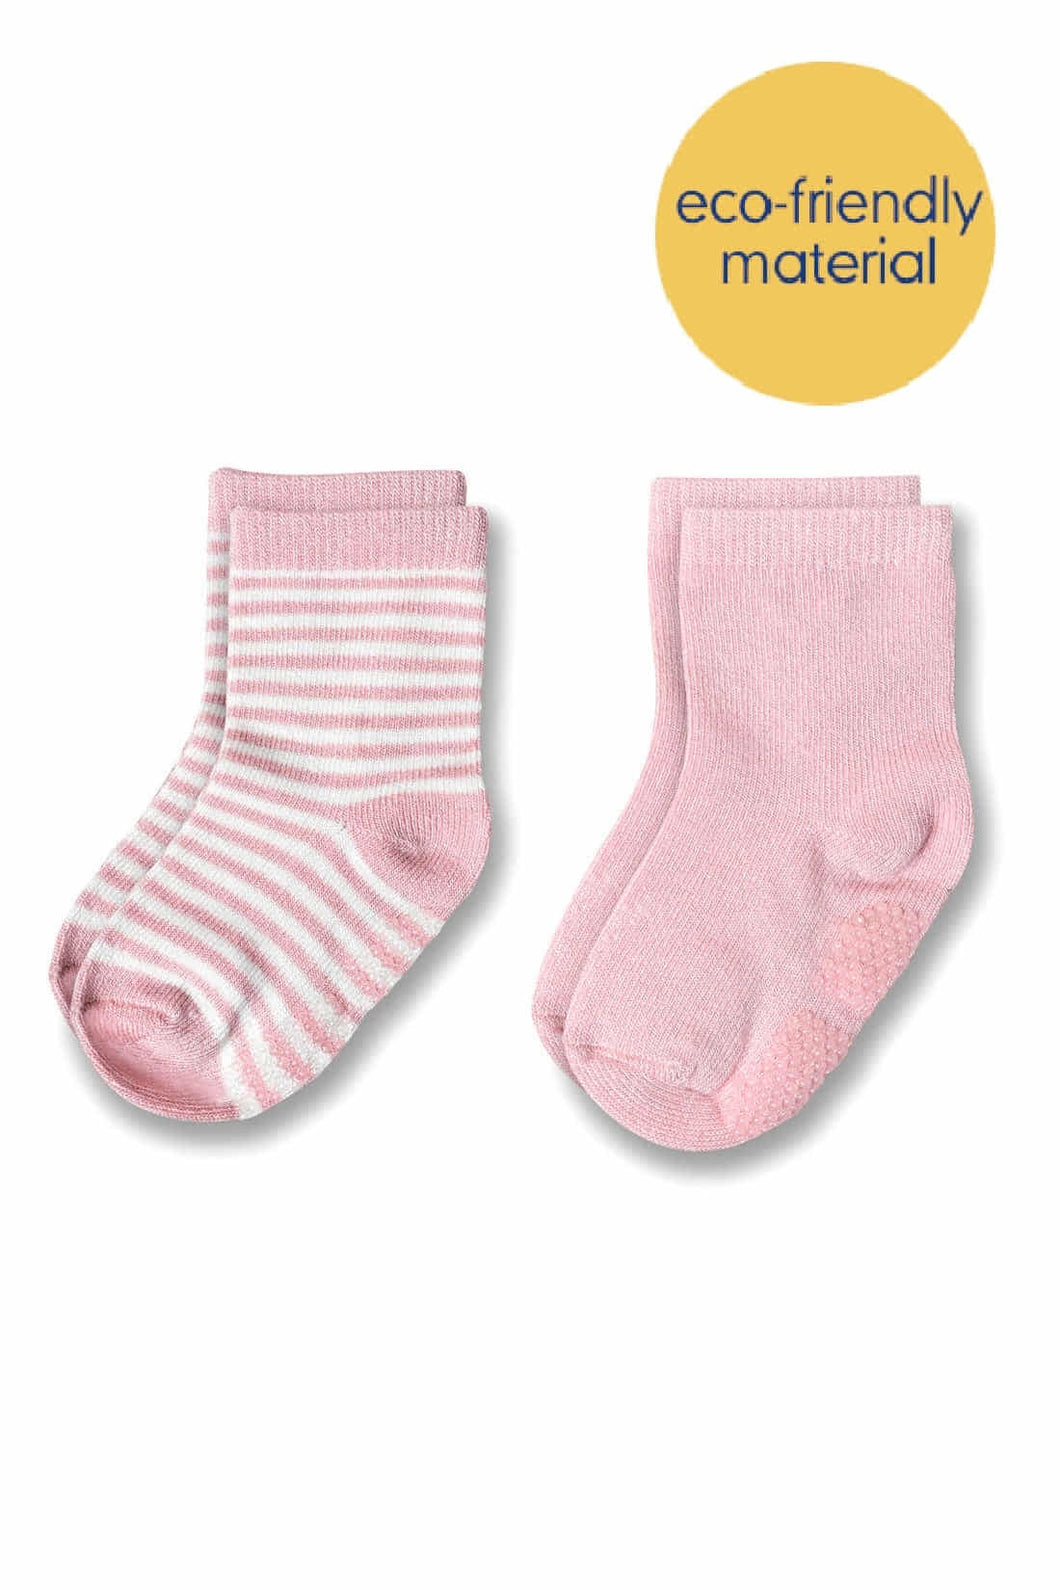 Not Too Big Pink Bamboo Socks - 2 Pack